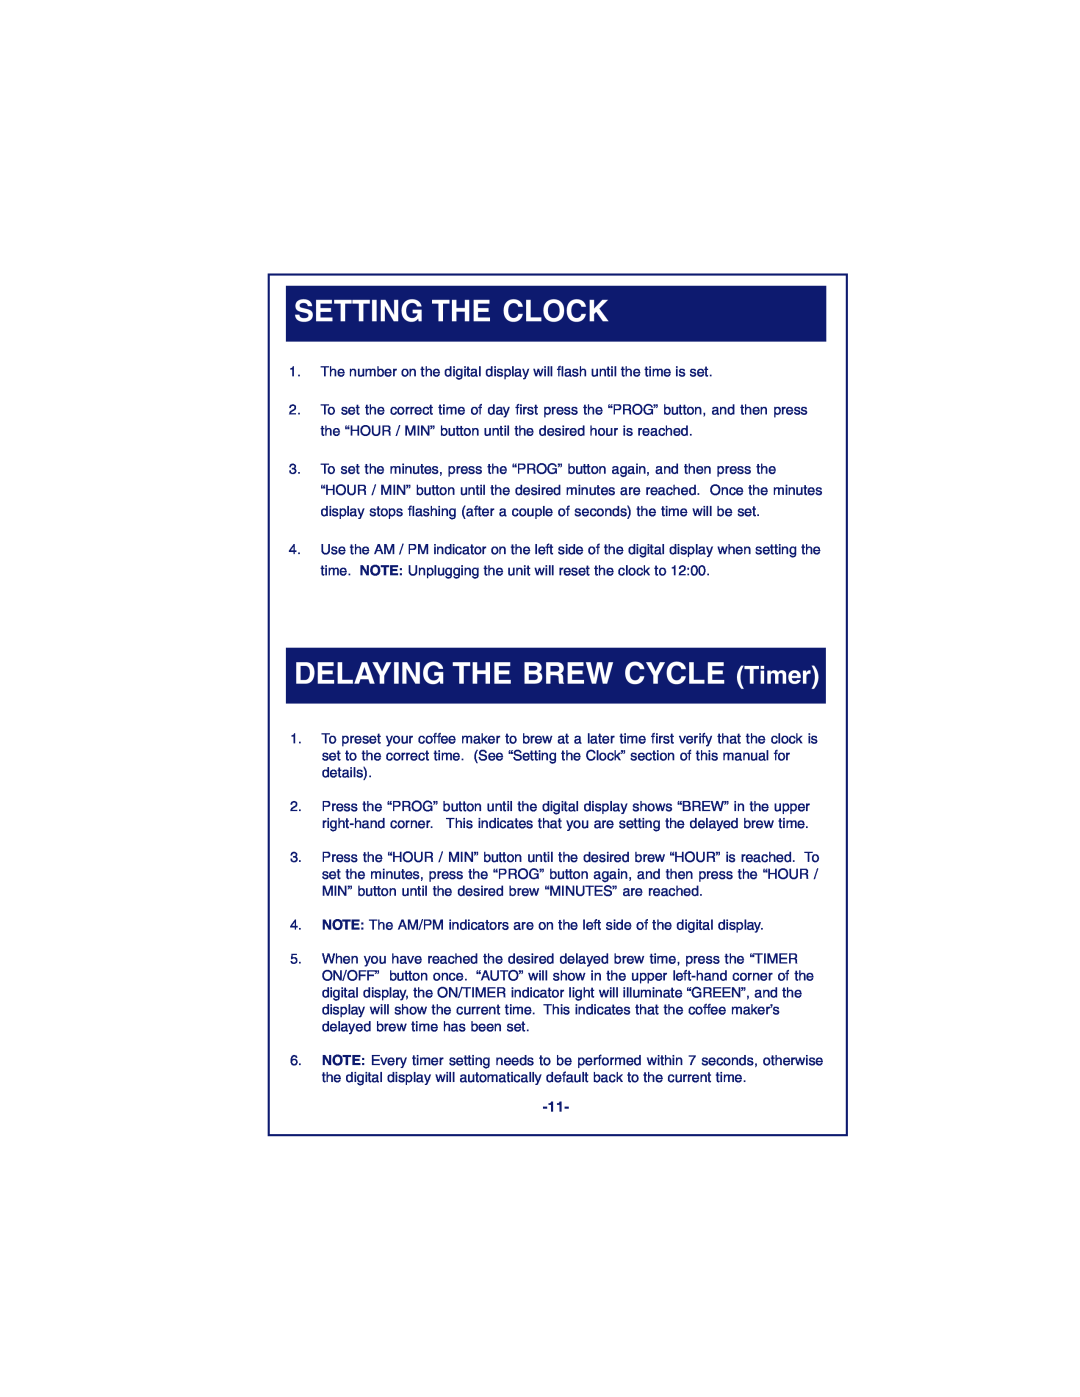 DeLonghi DC89TTC Series, DC87T Series instruction manual Setting The Clock, DELAYING THE BREW CYCLE Timer 